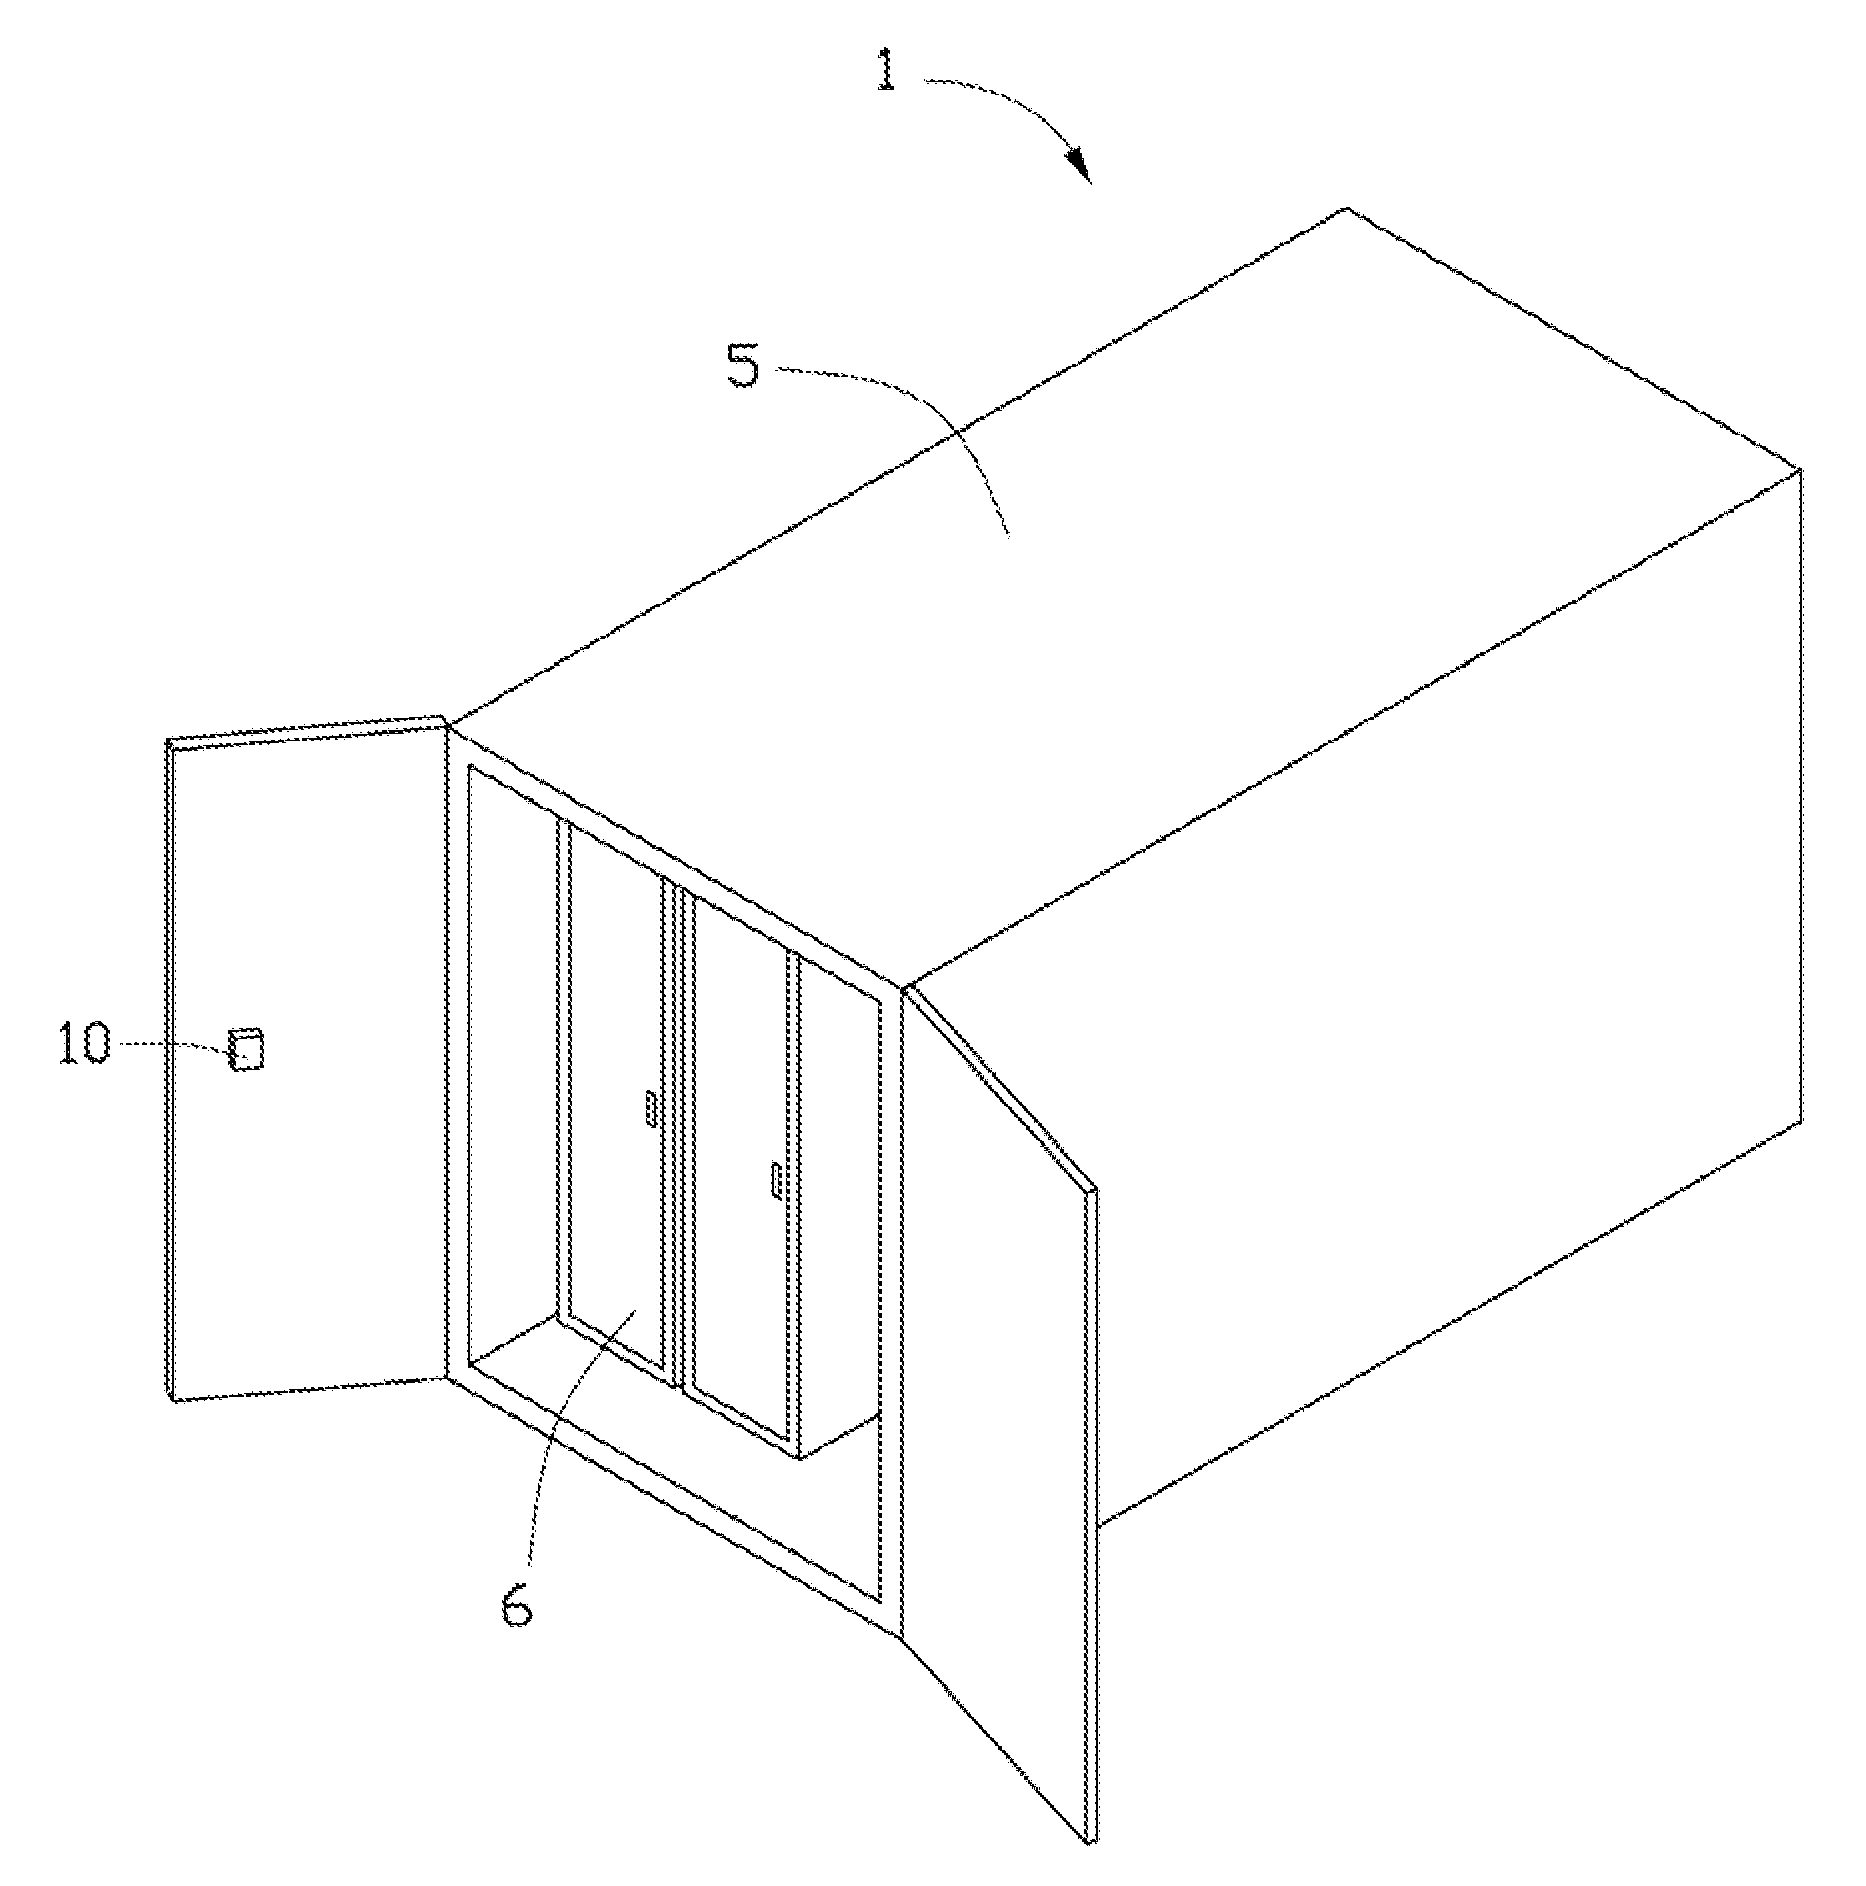 Noise reduction apparatus, method, and container data center including the same